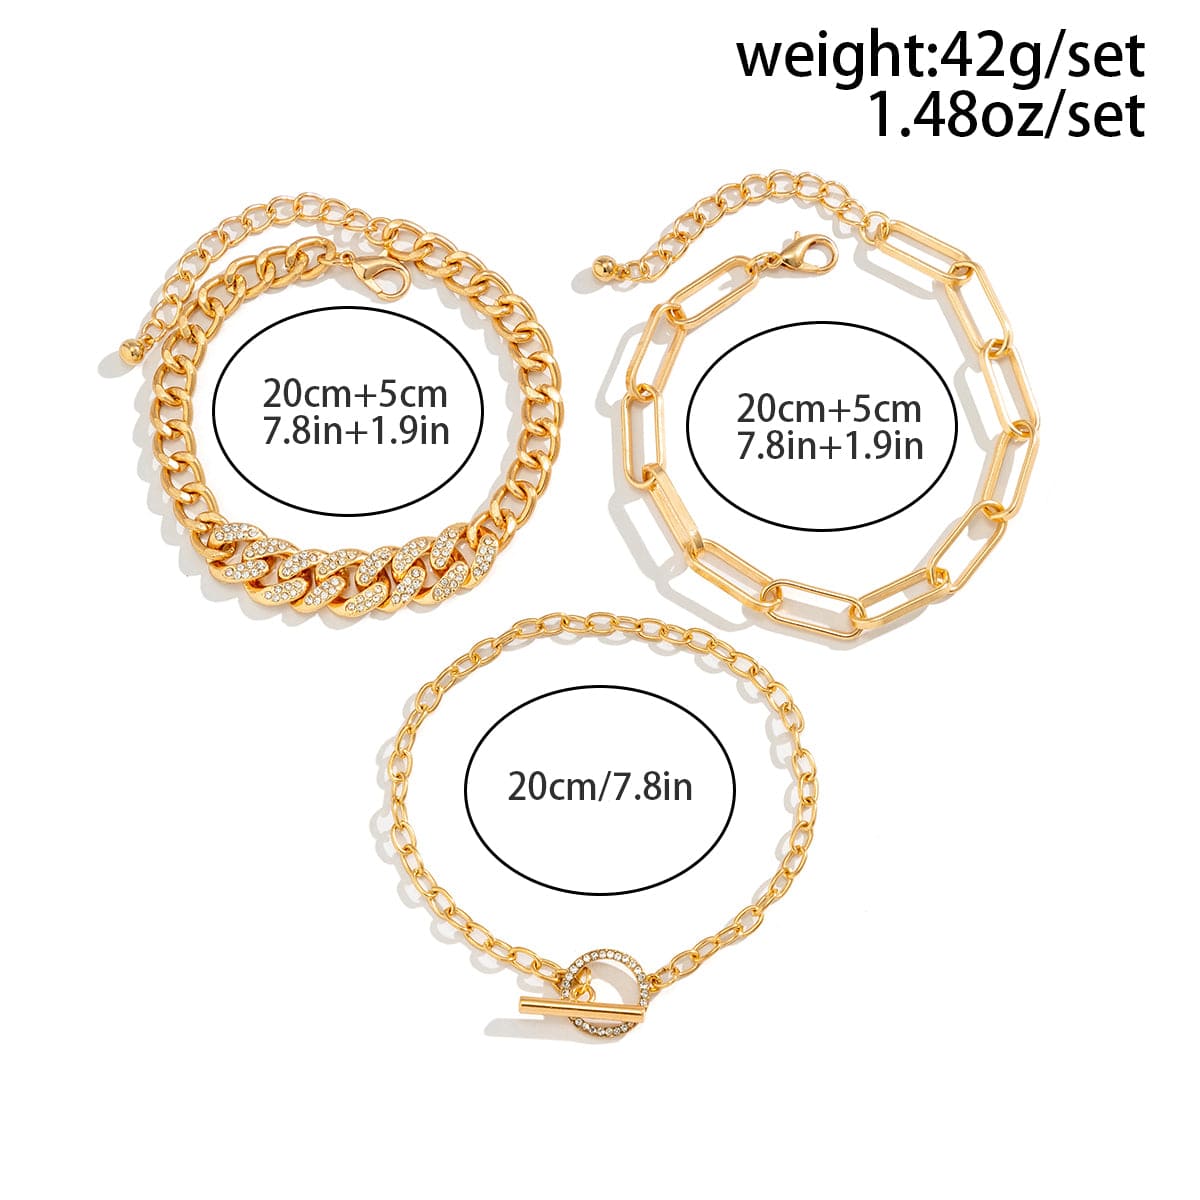 Bohemia CZ Inlaid Toggle Clasp Cable Curb Chain Stackable Anklet Set